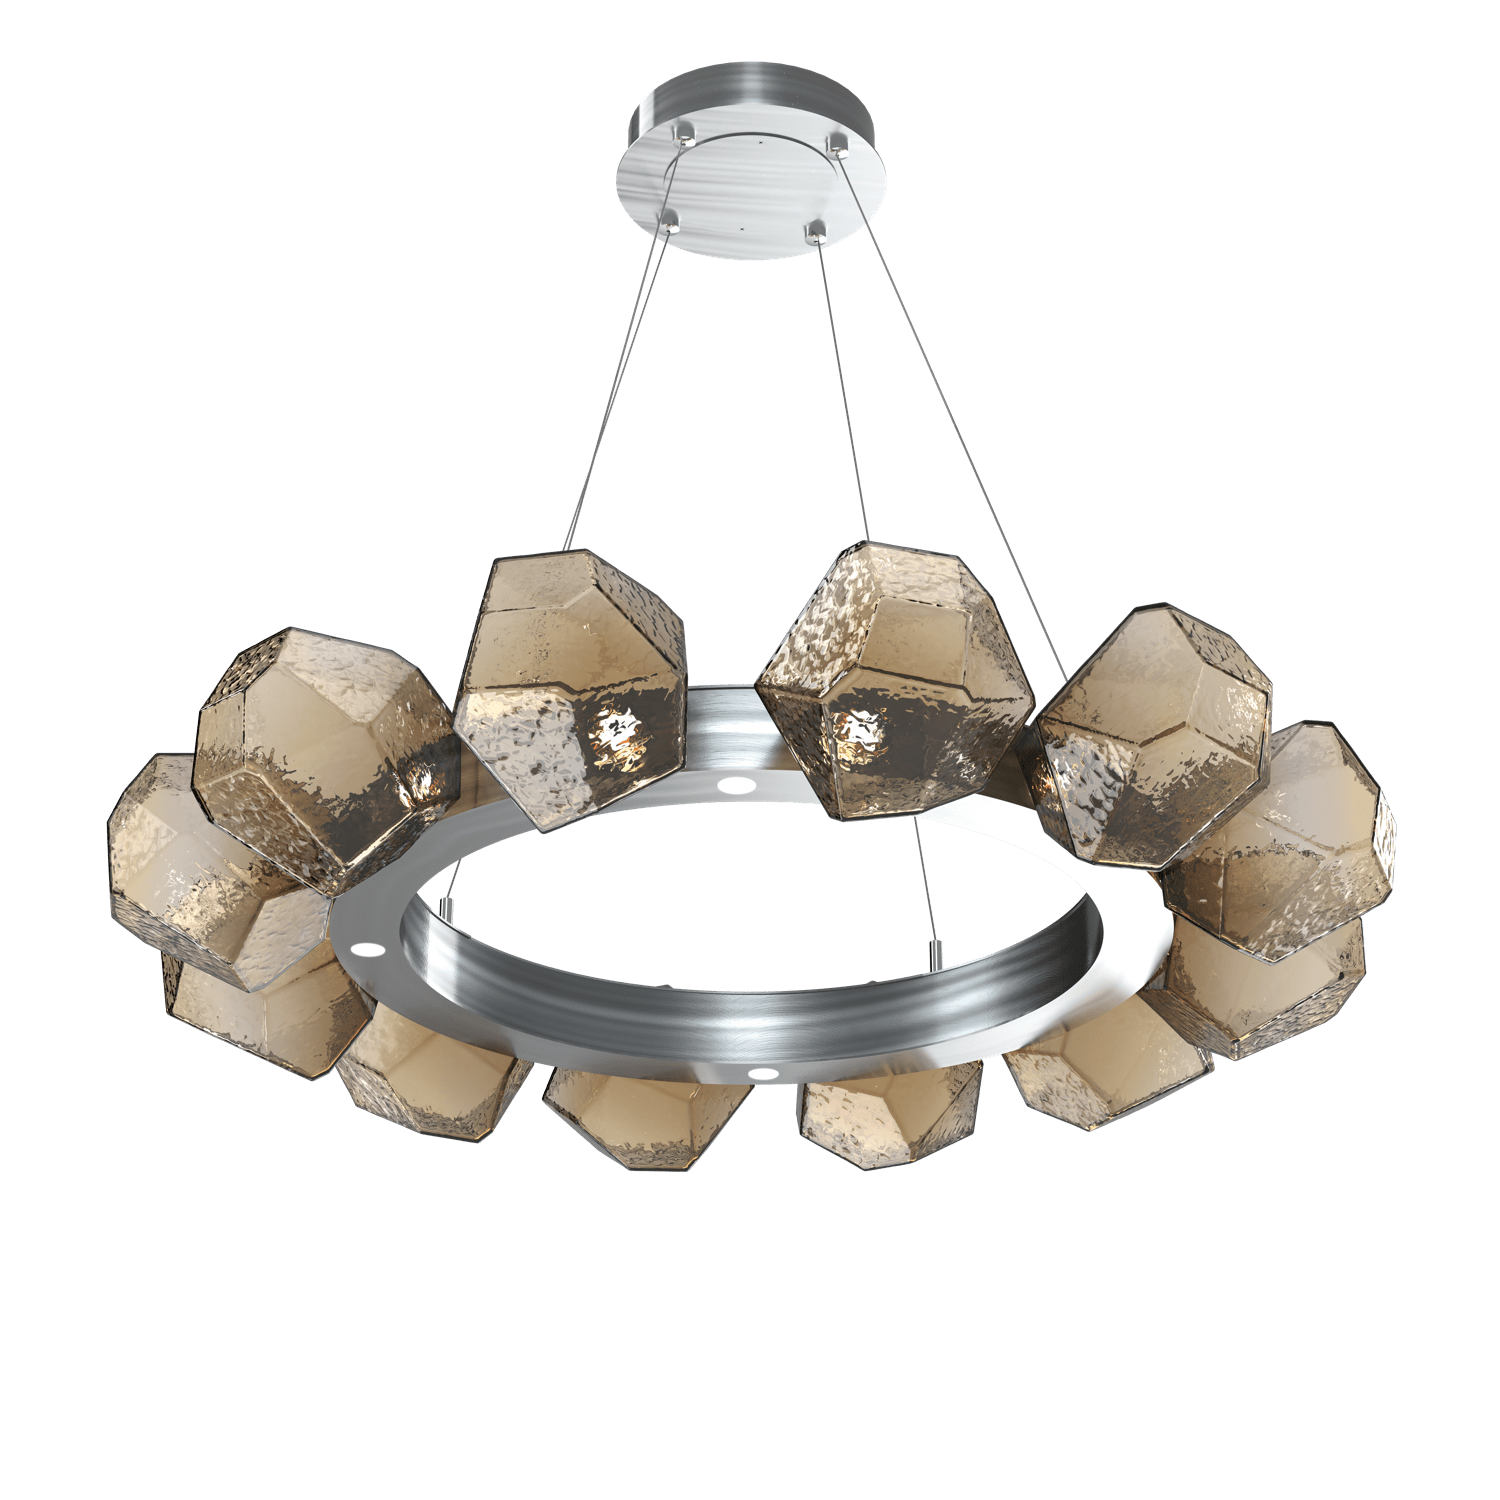 CHB0039-36-SN-B-Hammerton-Studio-Gem-36-inch-radial-ring-chandelier-with-satin-nickel-finish-and-bronze-blown-glass-shades-and-LED-lamping